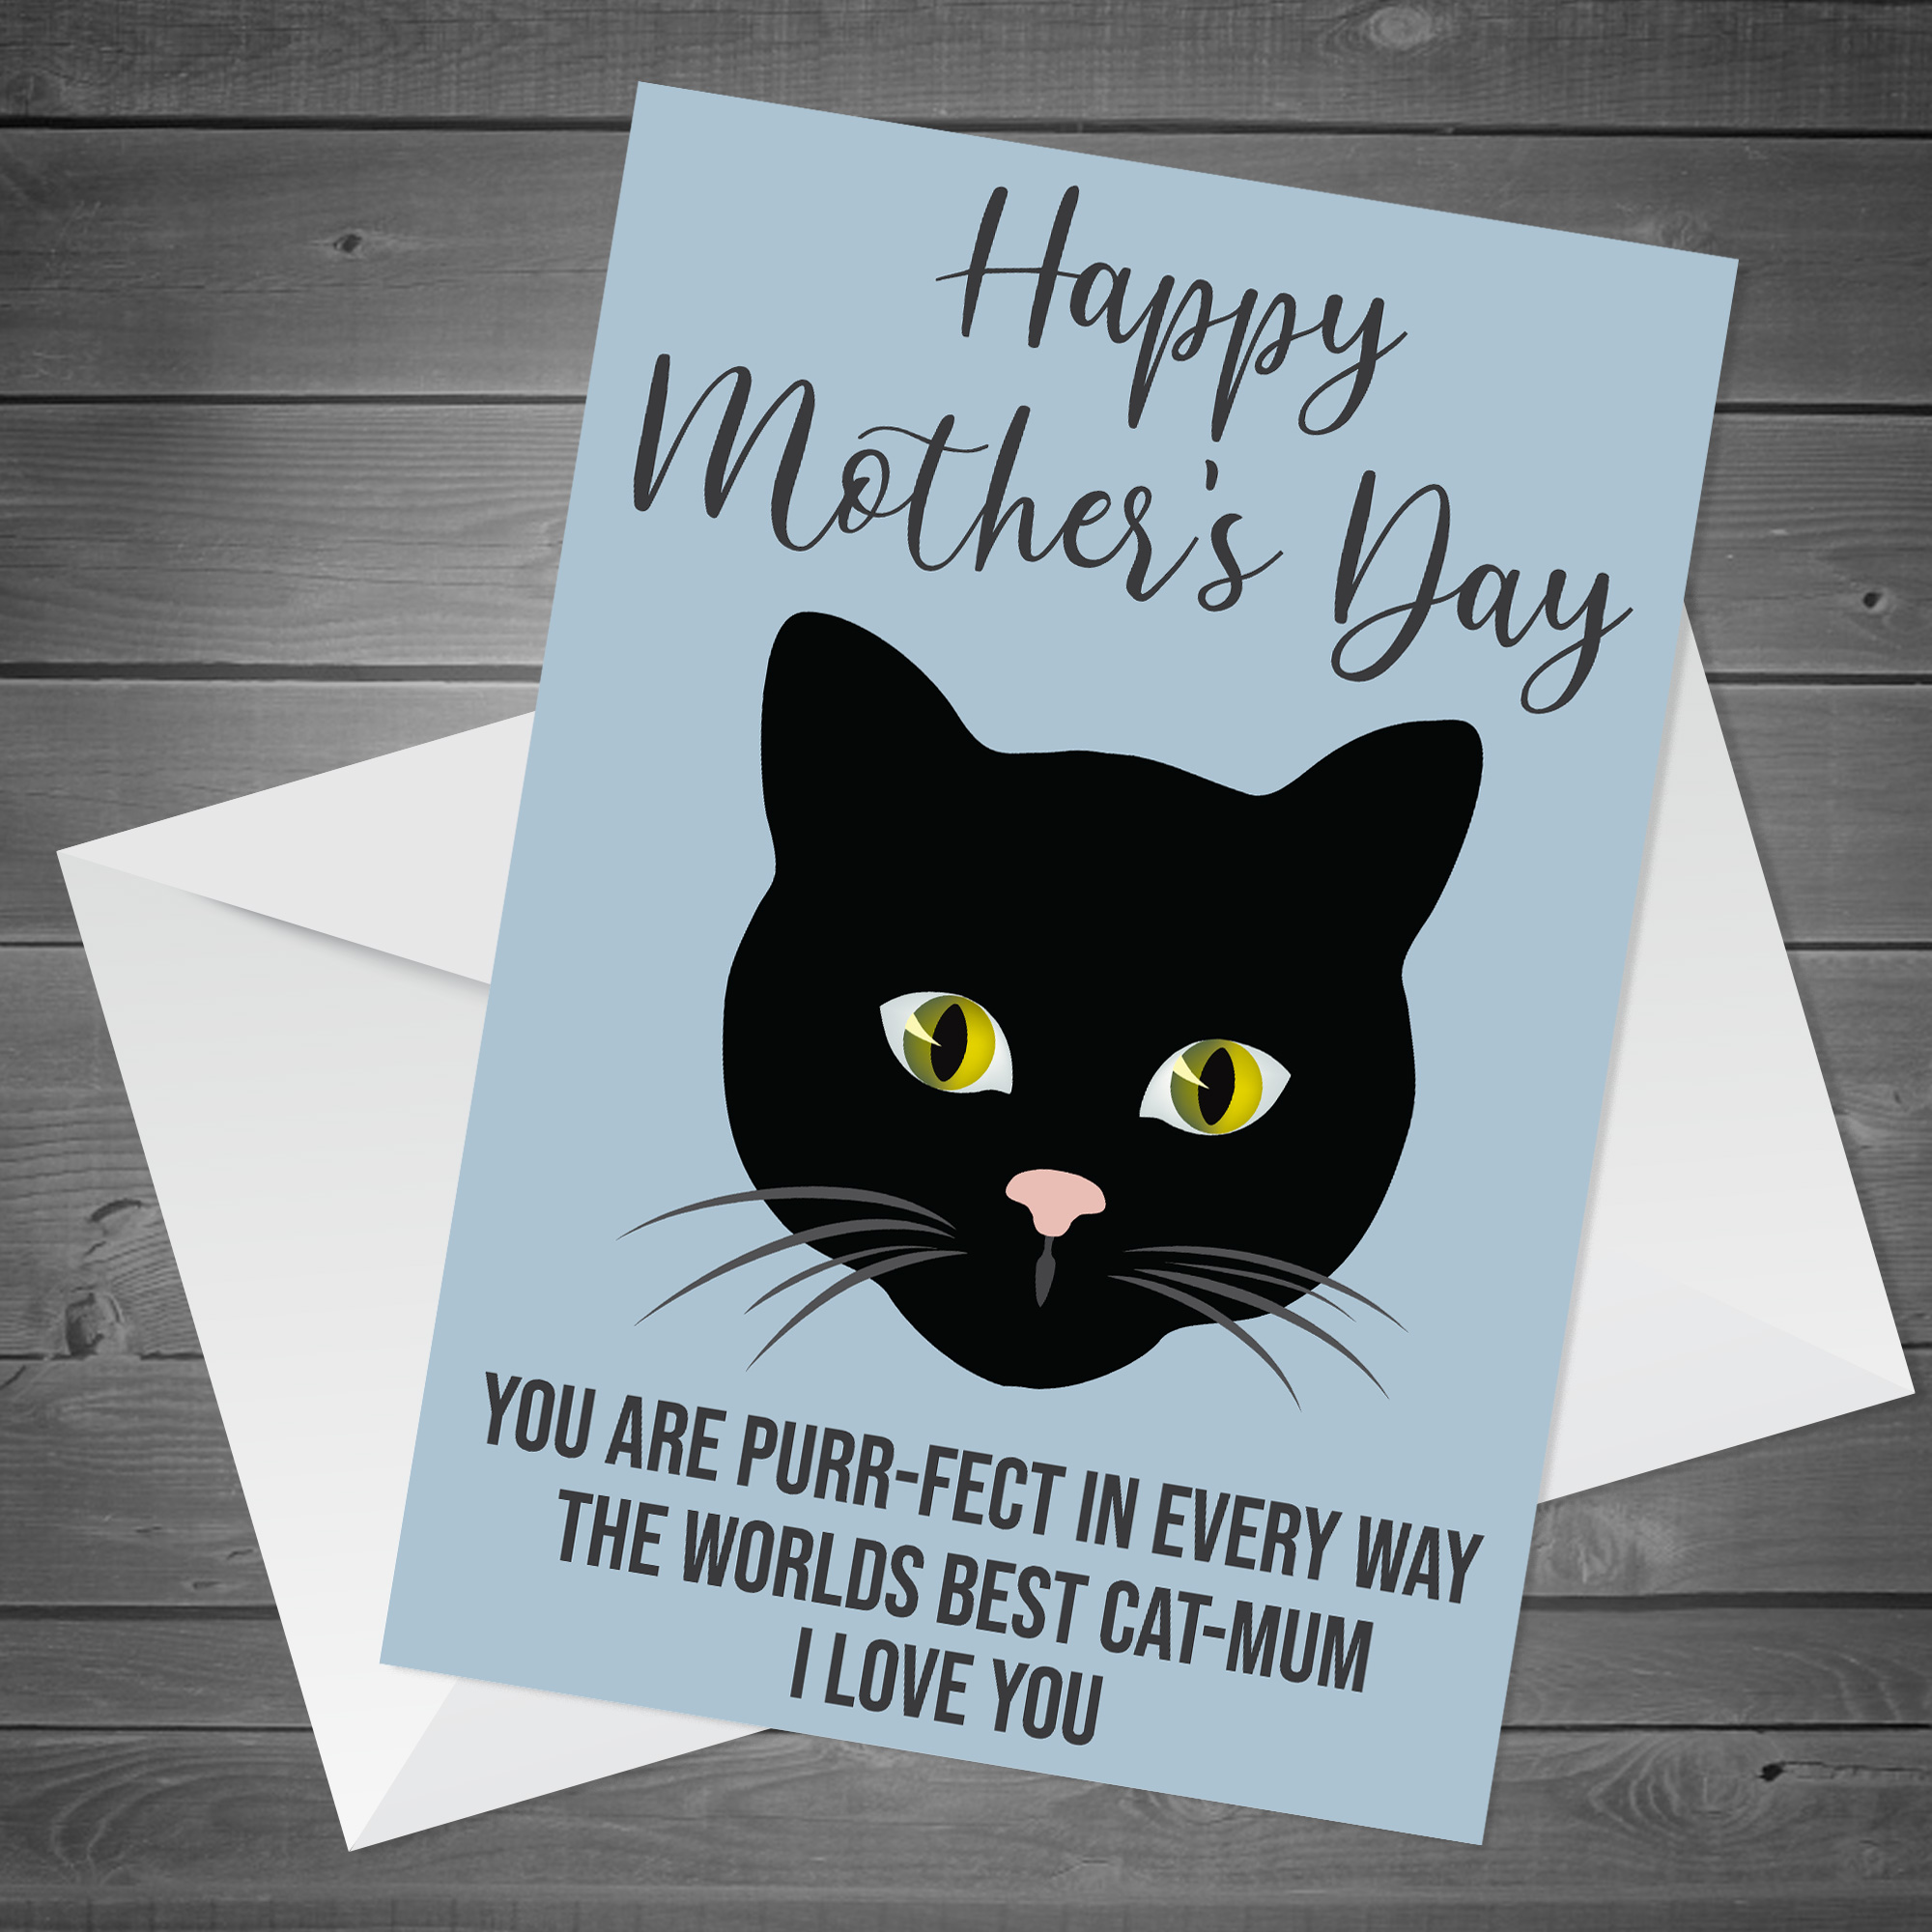 happy-mothers-day-gift-card-from-the-cat-cute-kitty-mum-cards-ebay